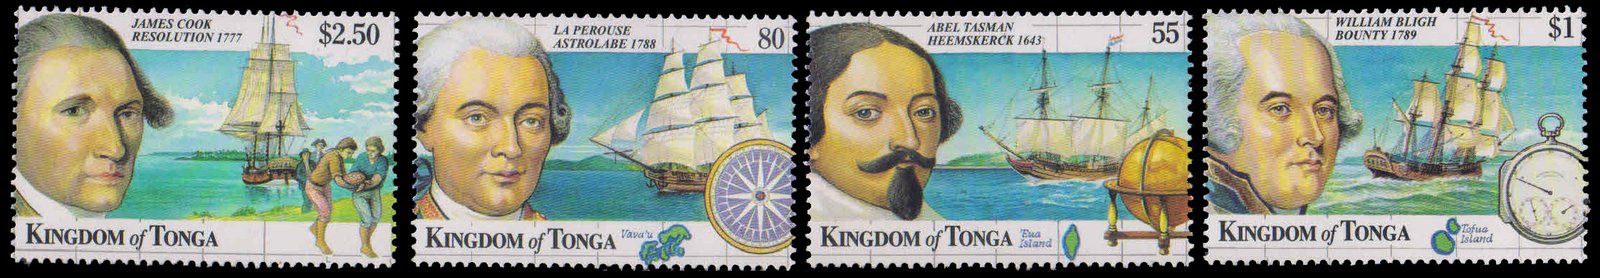 TONGA 1999-Early Explorers-Bounty, Cook, Ship, Set of 4 Stamps, MNH, S.G. 1448-51-Cat £ 13-